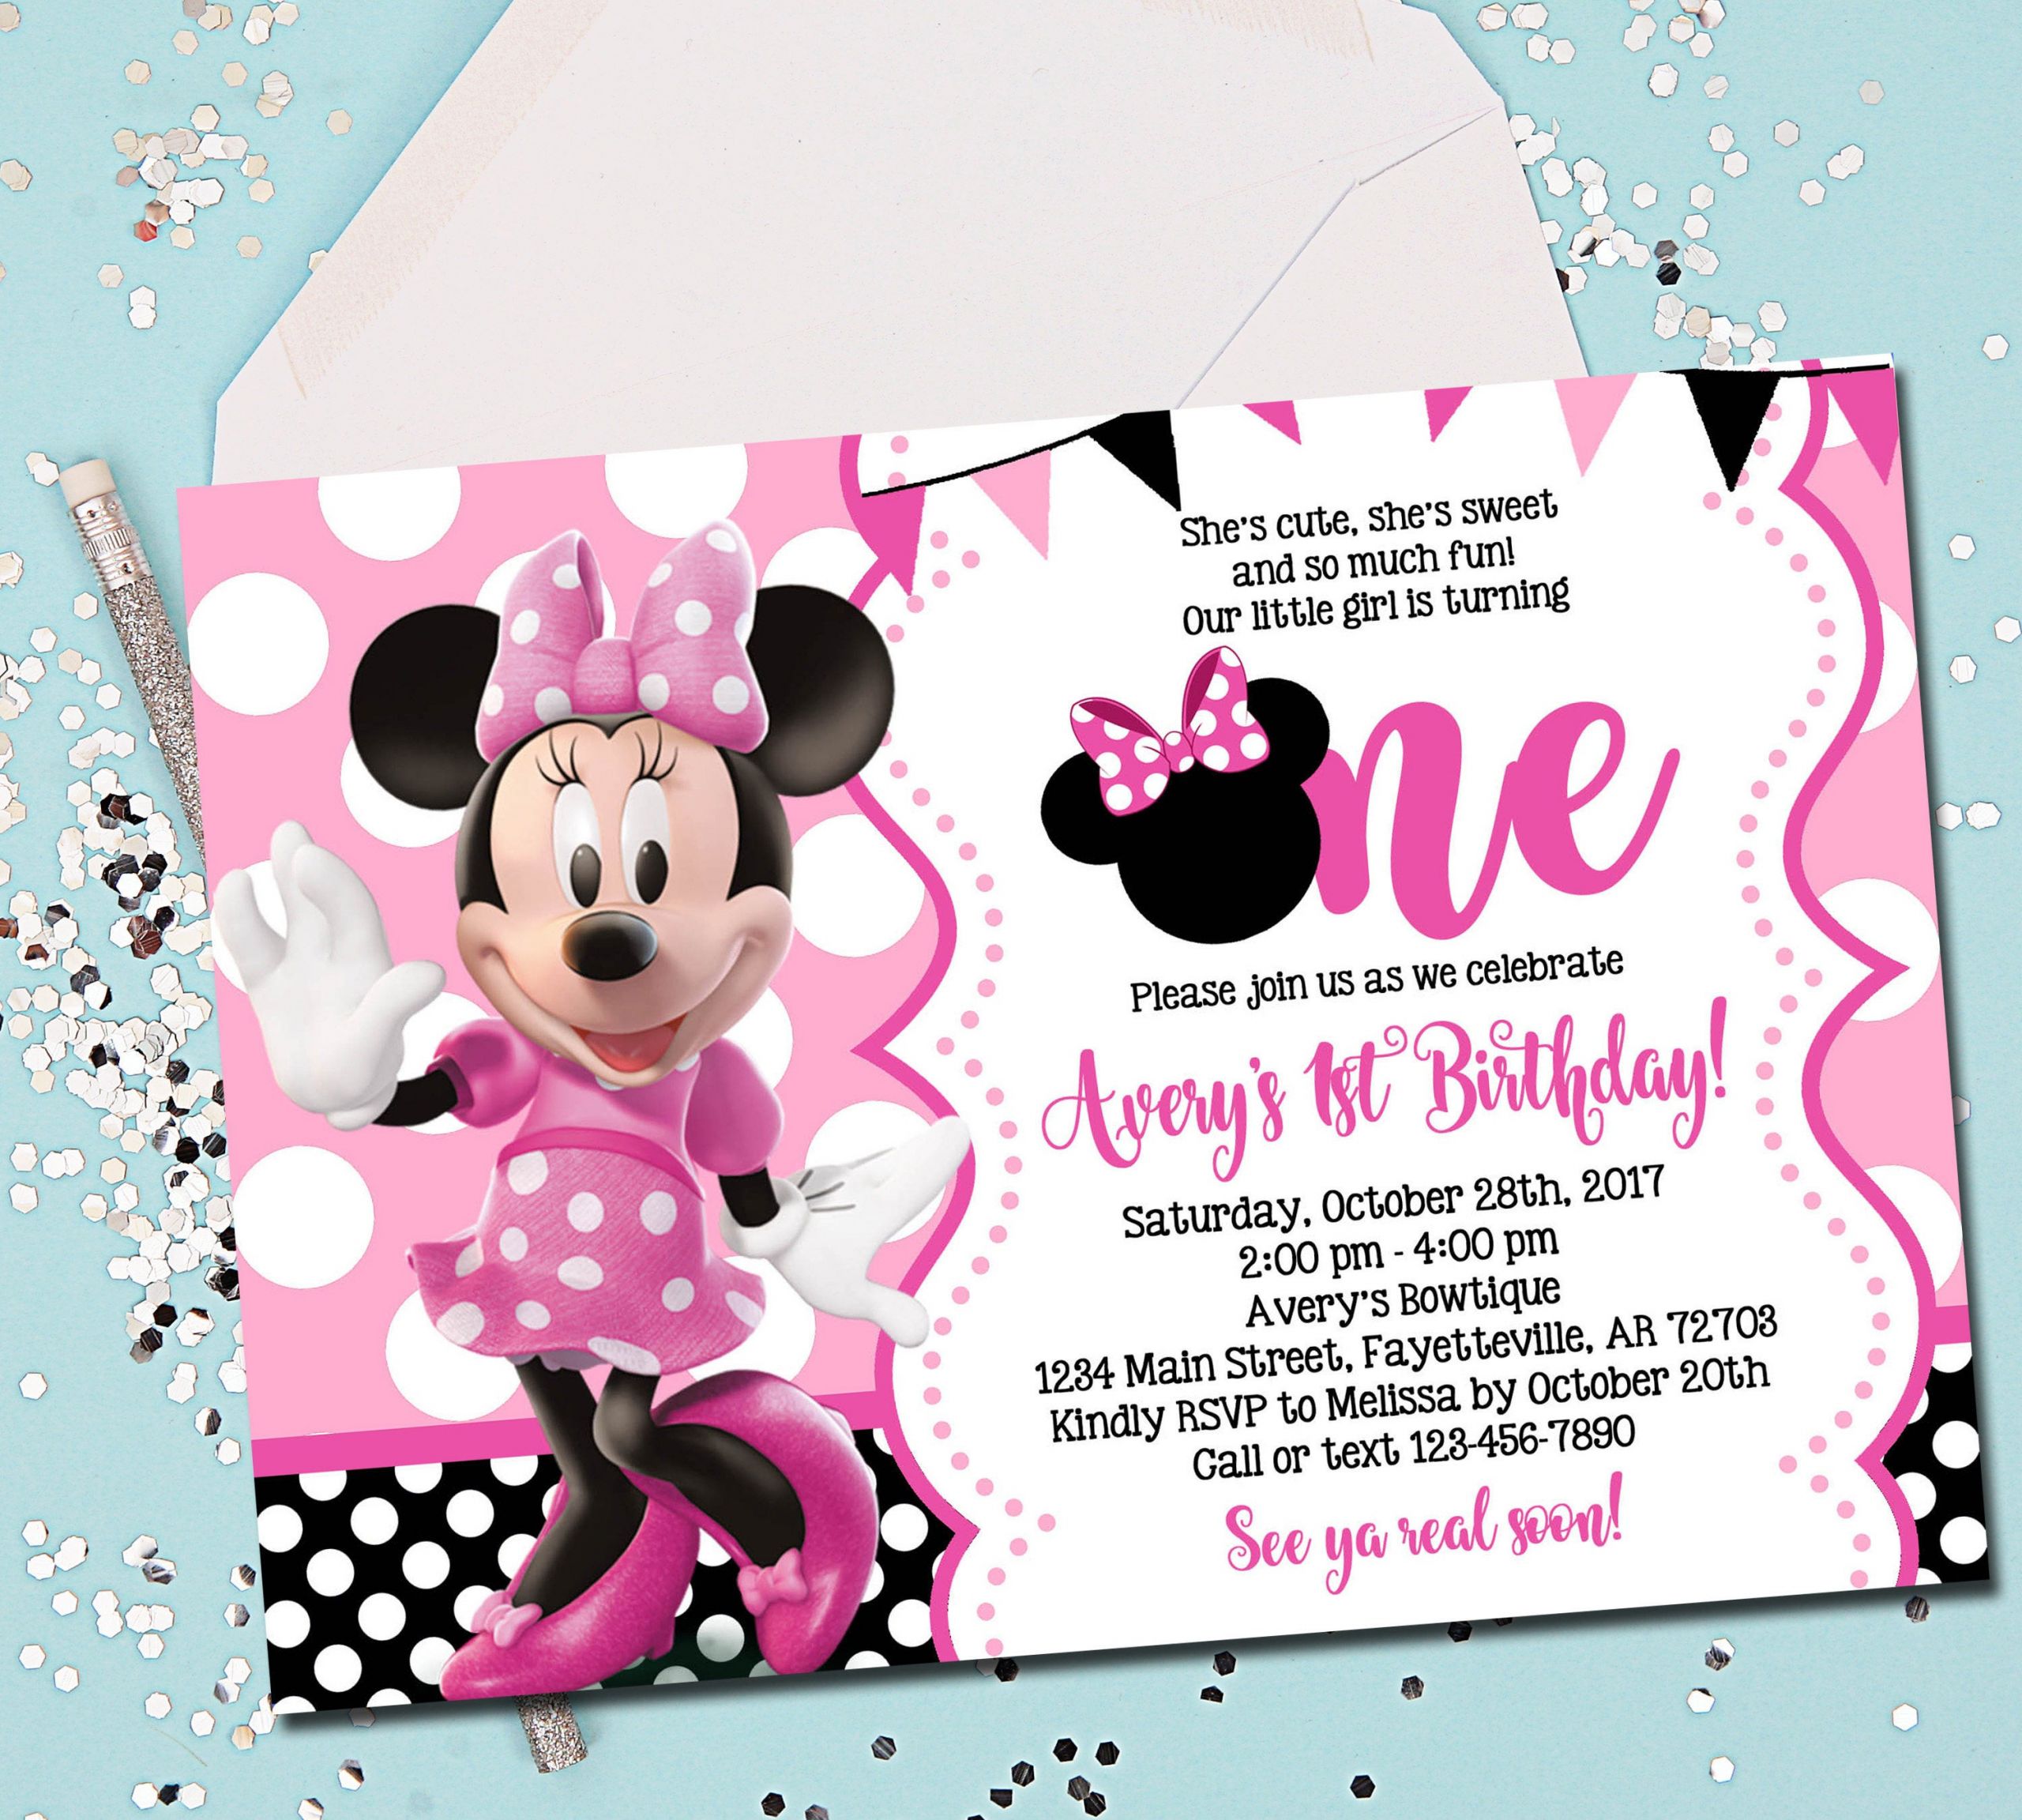 Minnie Mouse 1st Birthday Personalized Invitations
 MINNIE MOUSE INVITATION Minnie Mouse Birthday Invitation